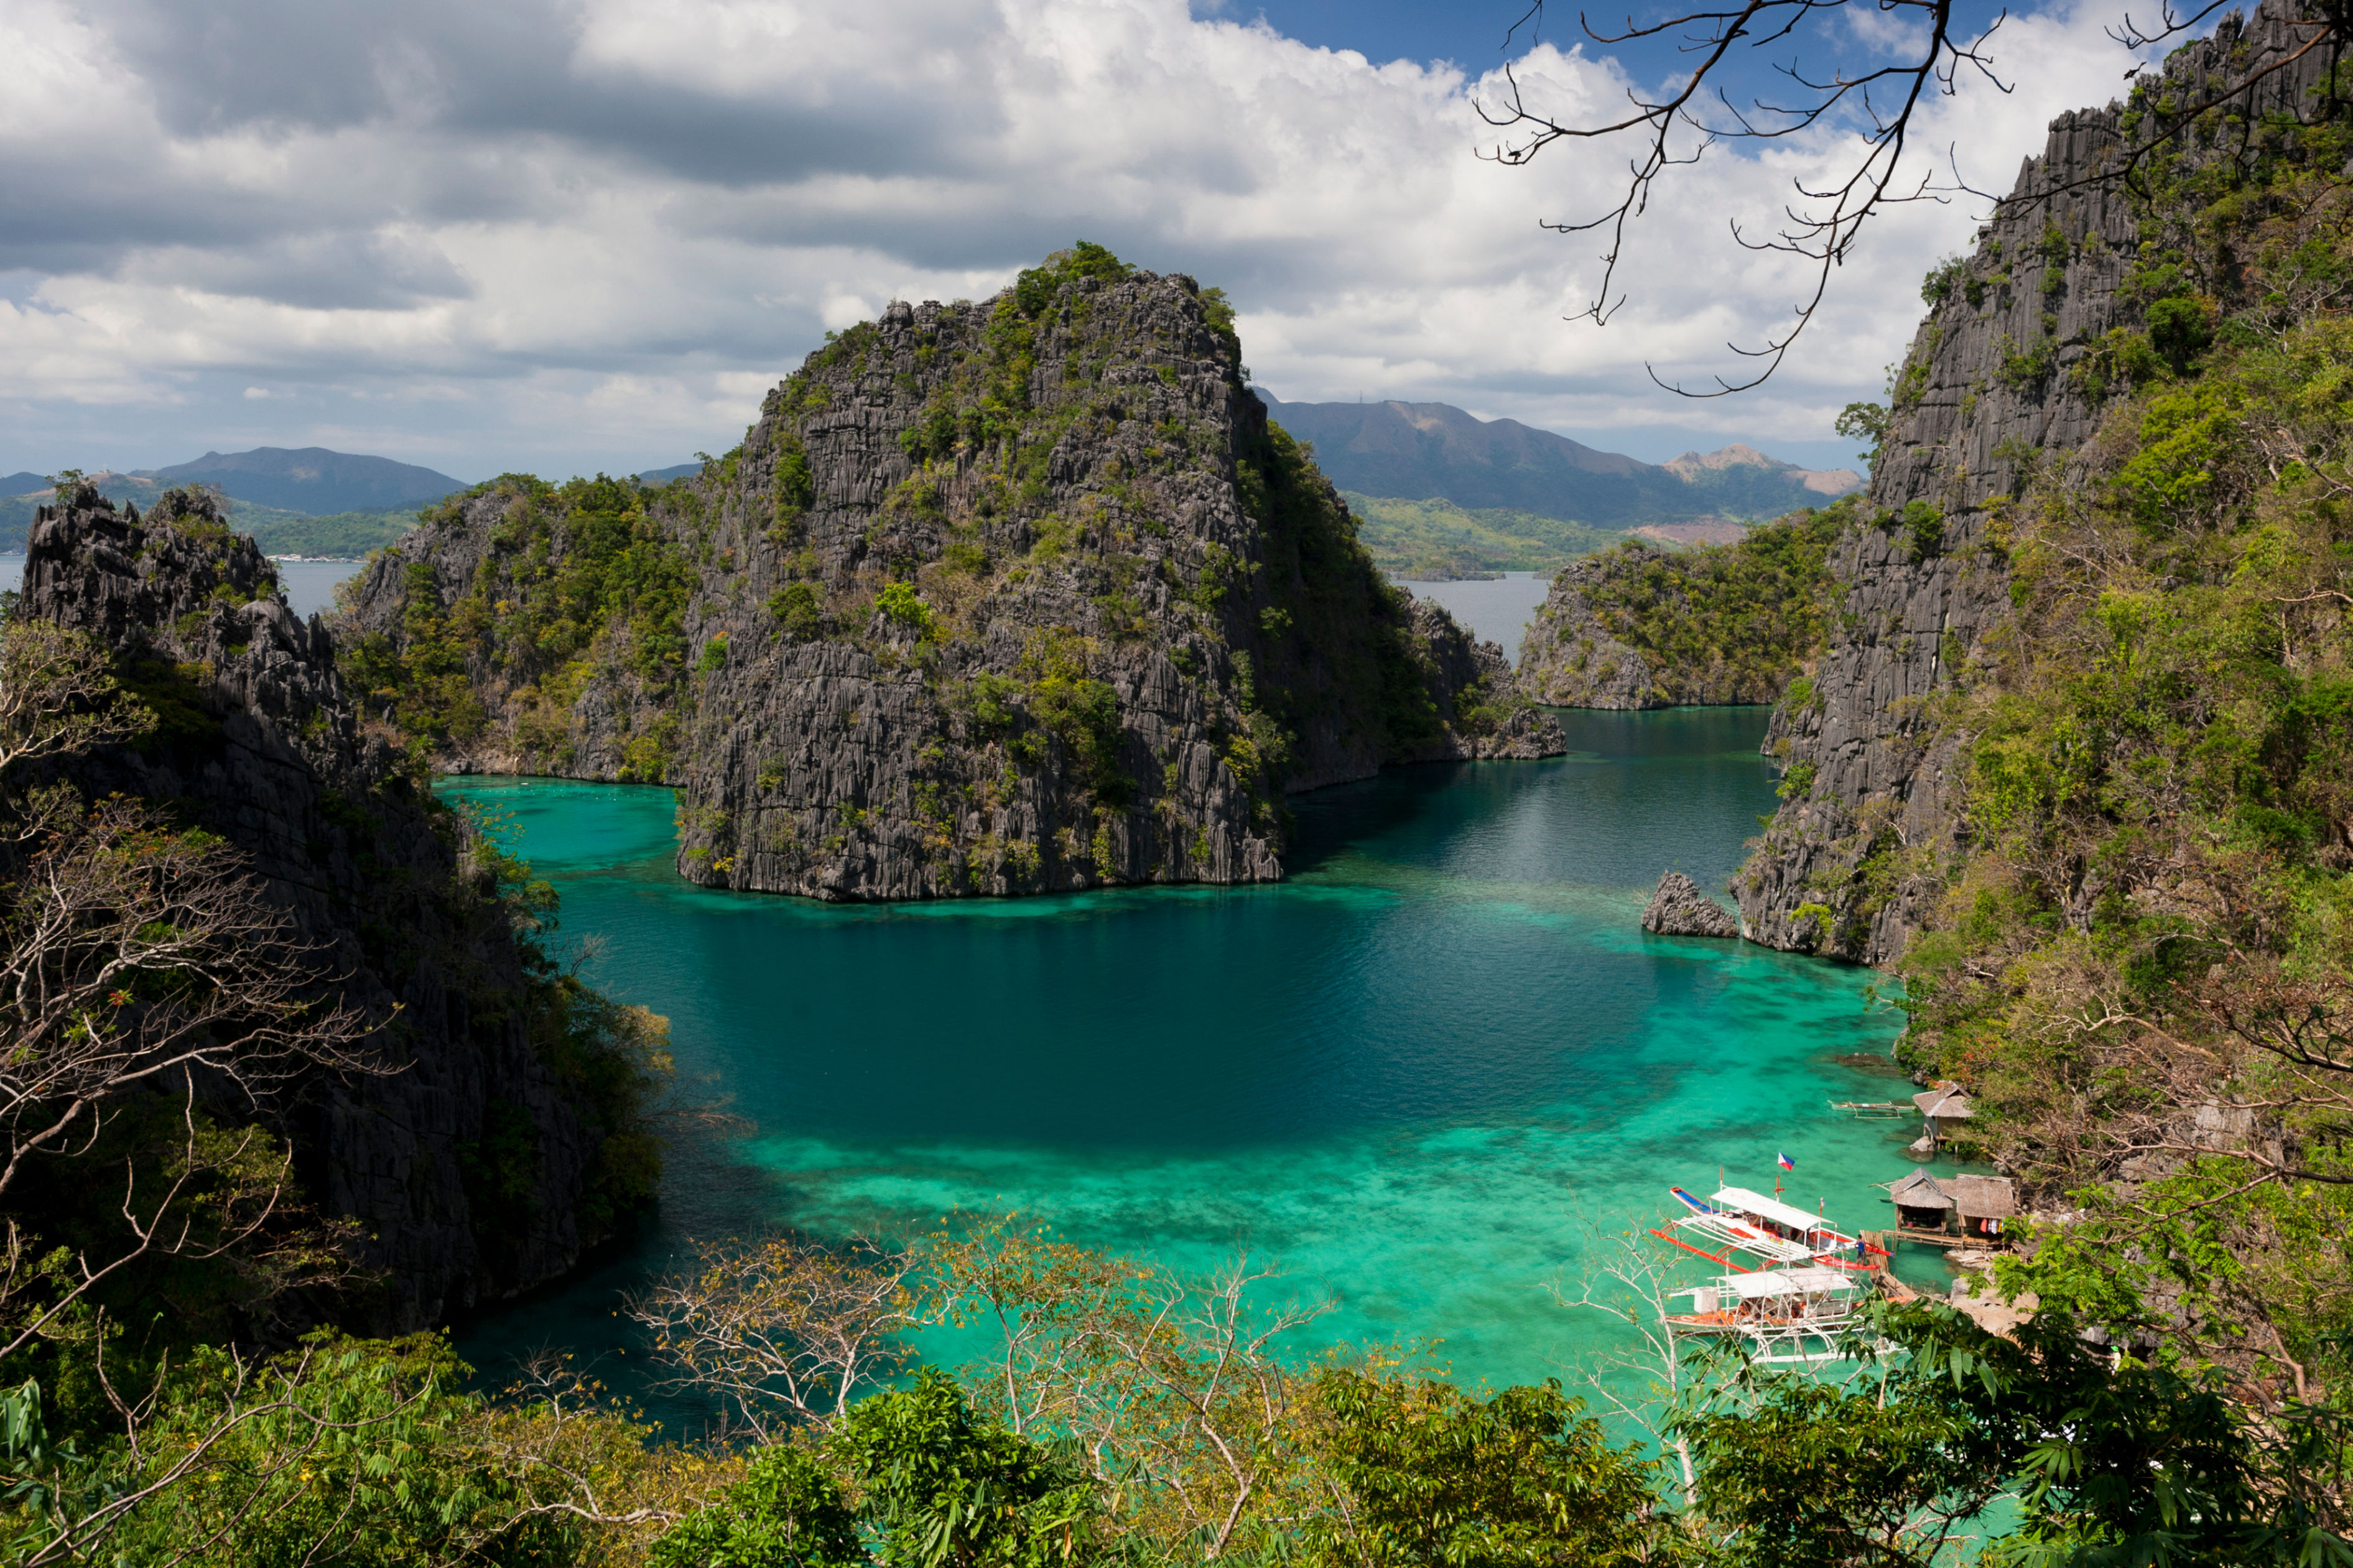 Check out: Coron Island in the Philippines is more than just blue seas and sandy beaches